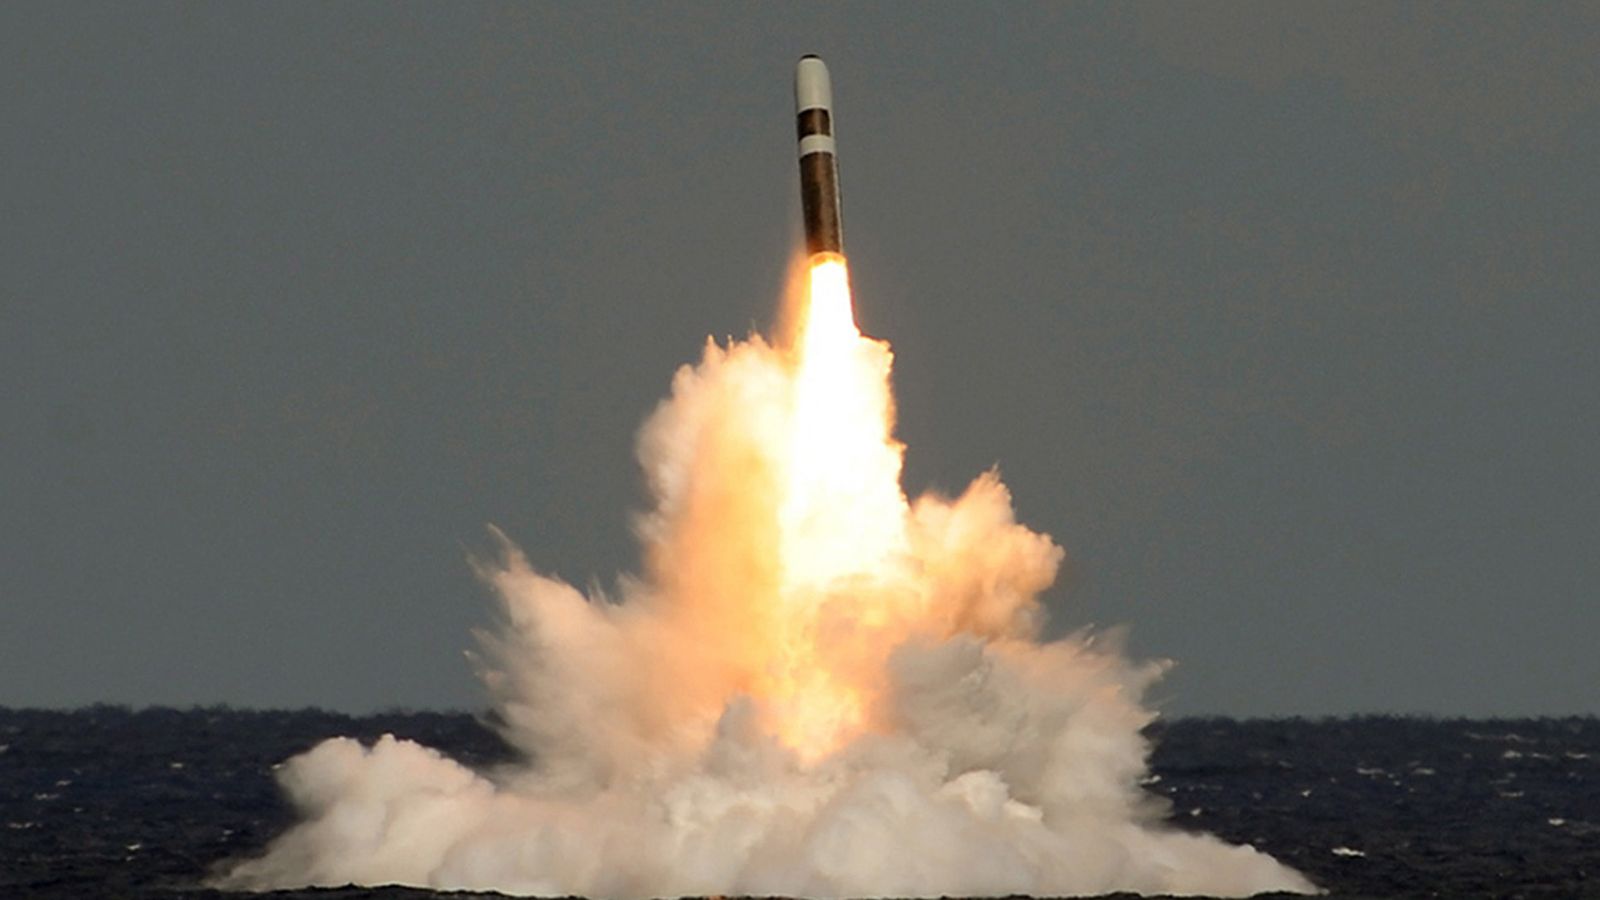 Trident Missile Test Fails for the Second Time in a Row